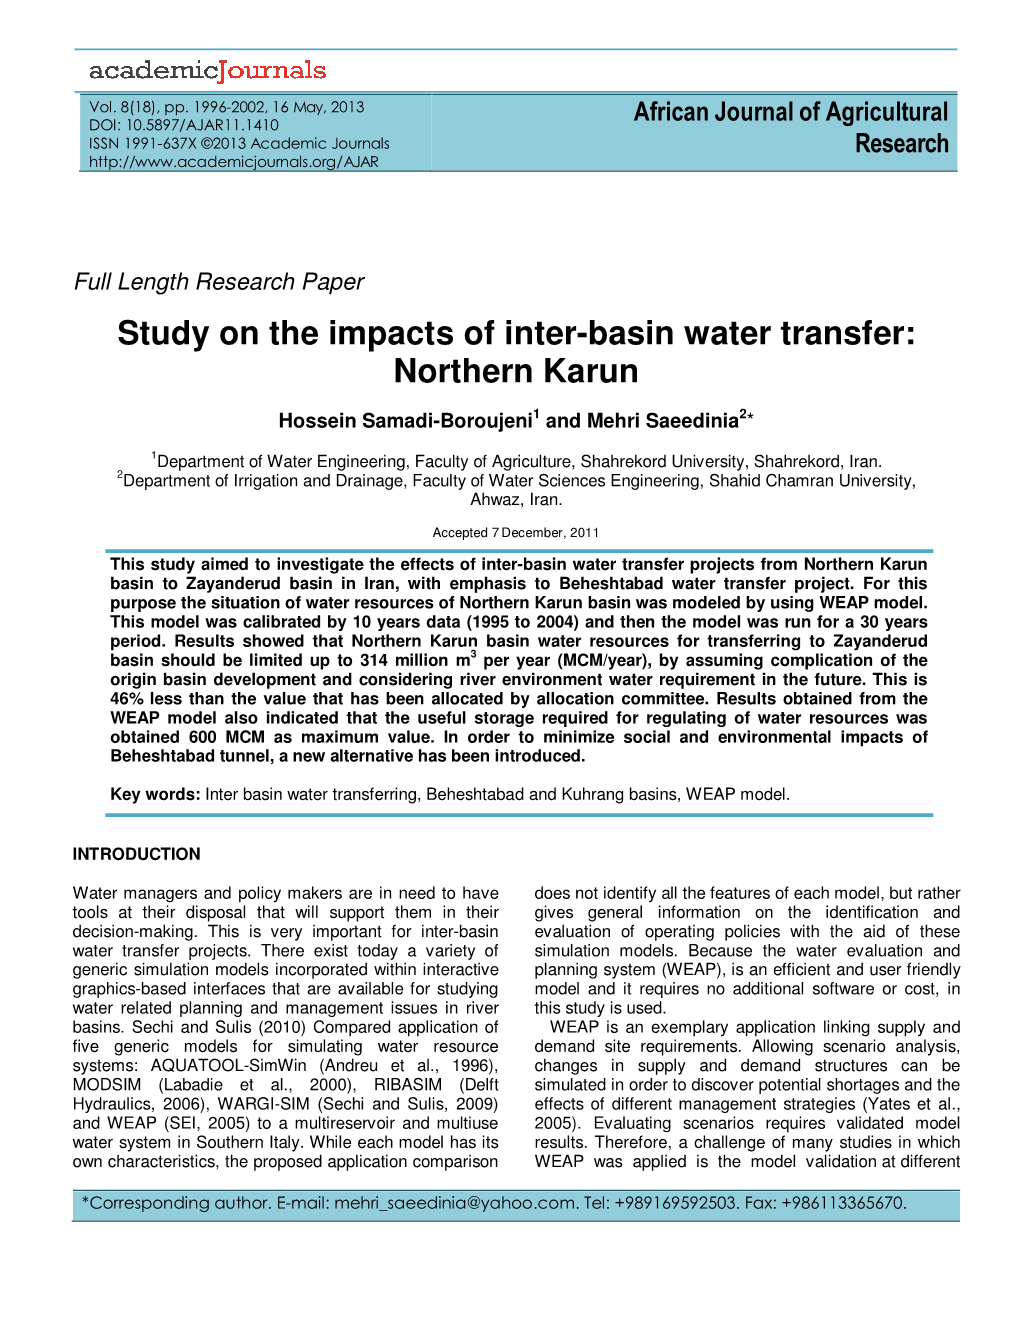 Study on the Impacts of Inter-Basin Water Transfer: Northern Karun